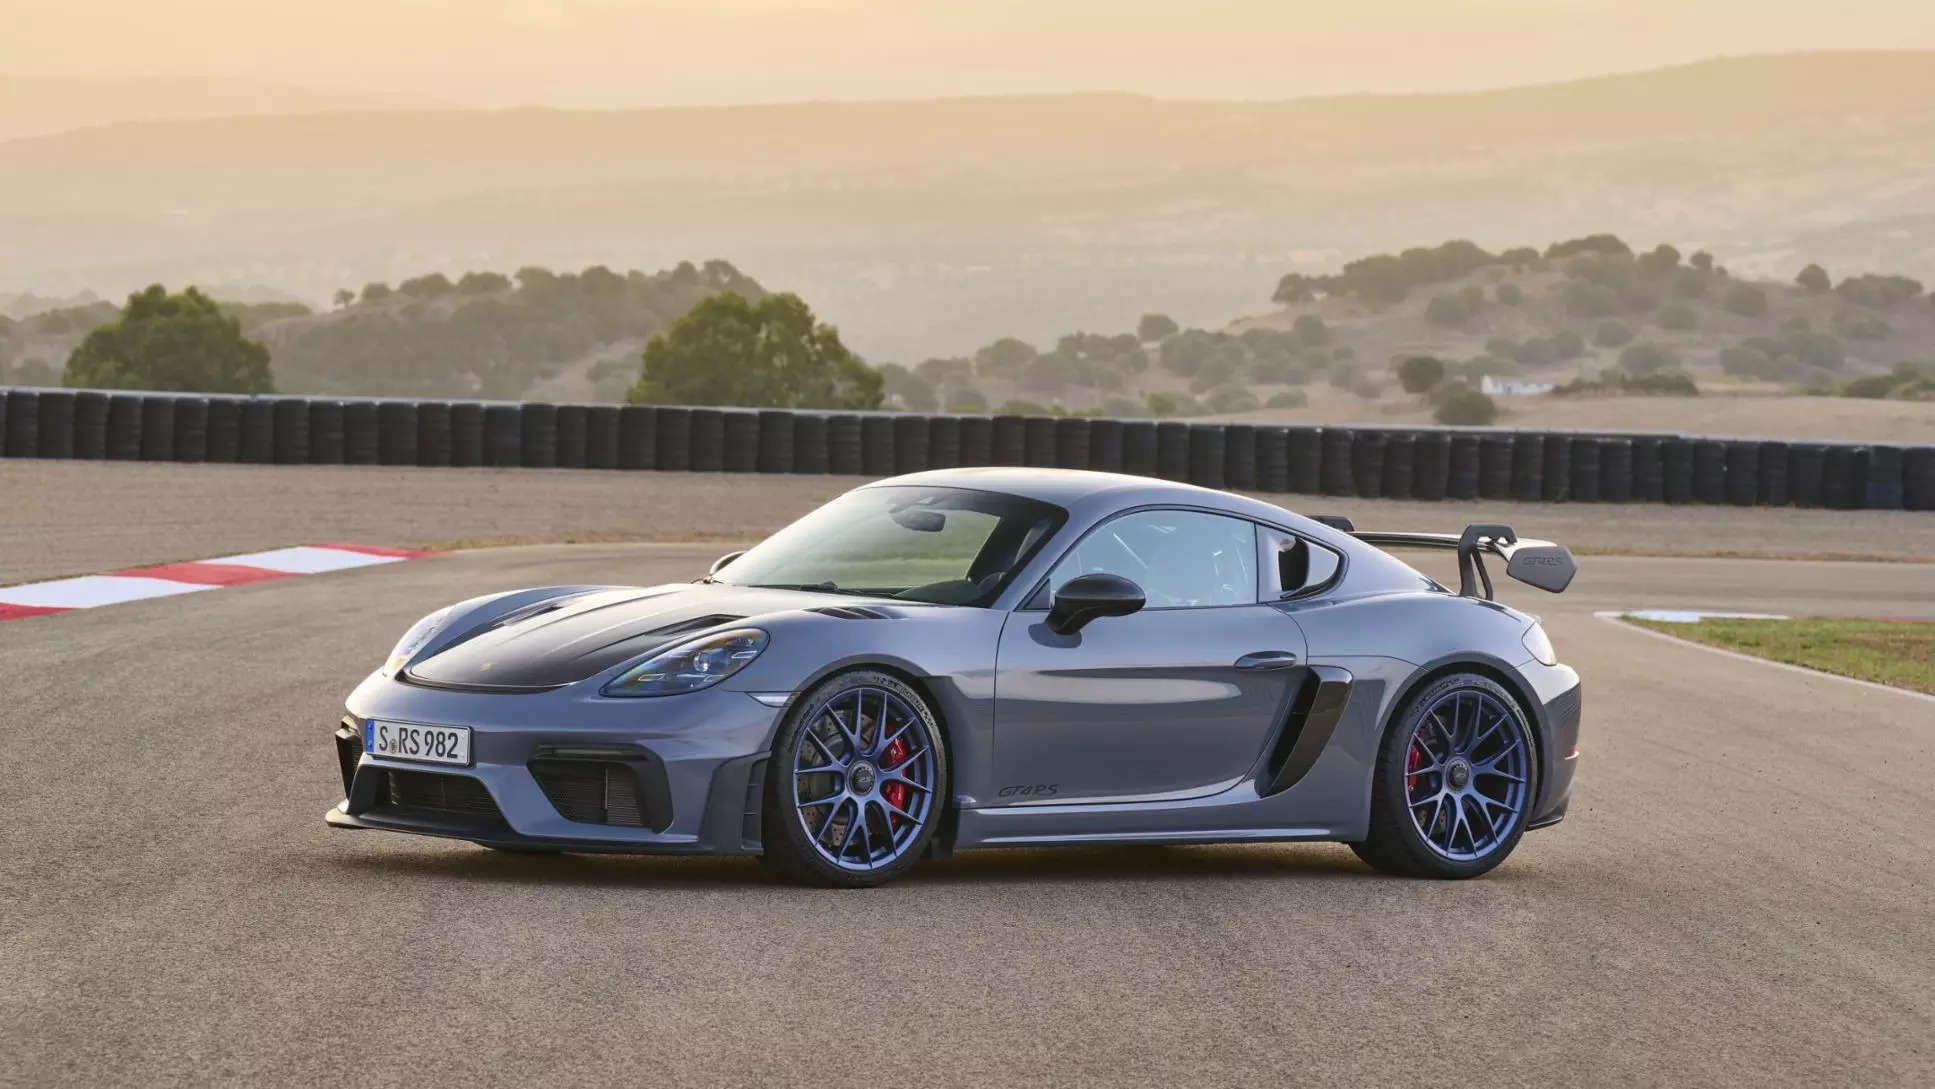 Porsche 718 Cayman GT4 RS set to exclusively premier in India on January 25.